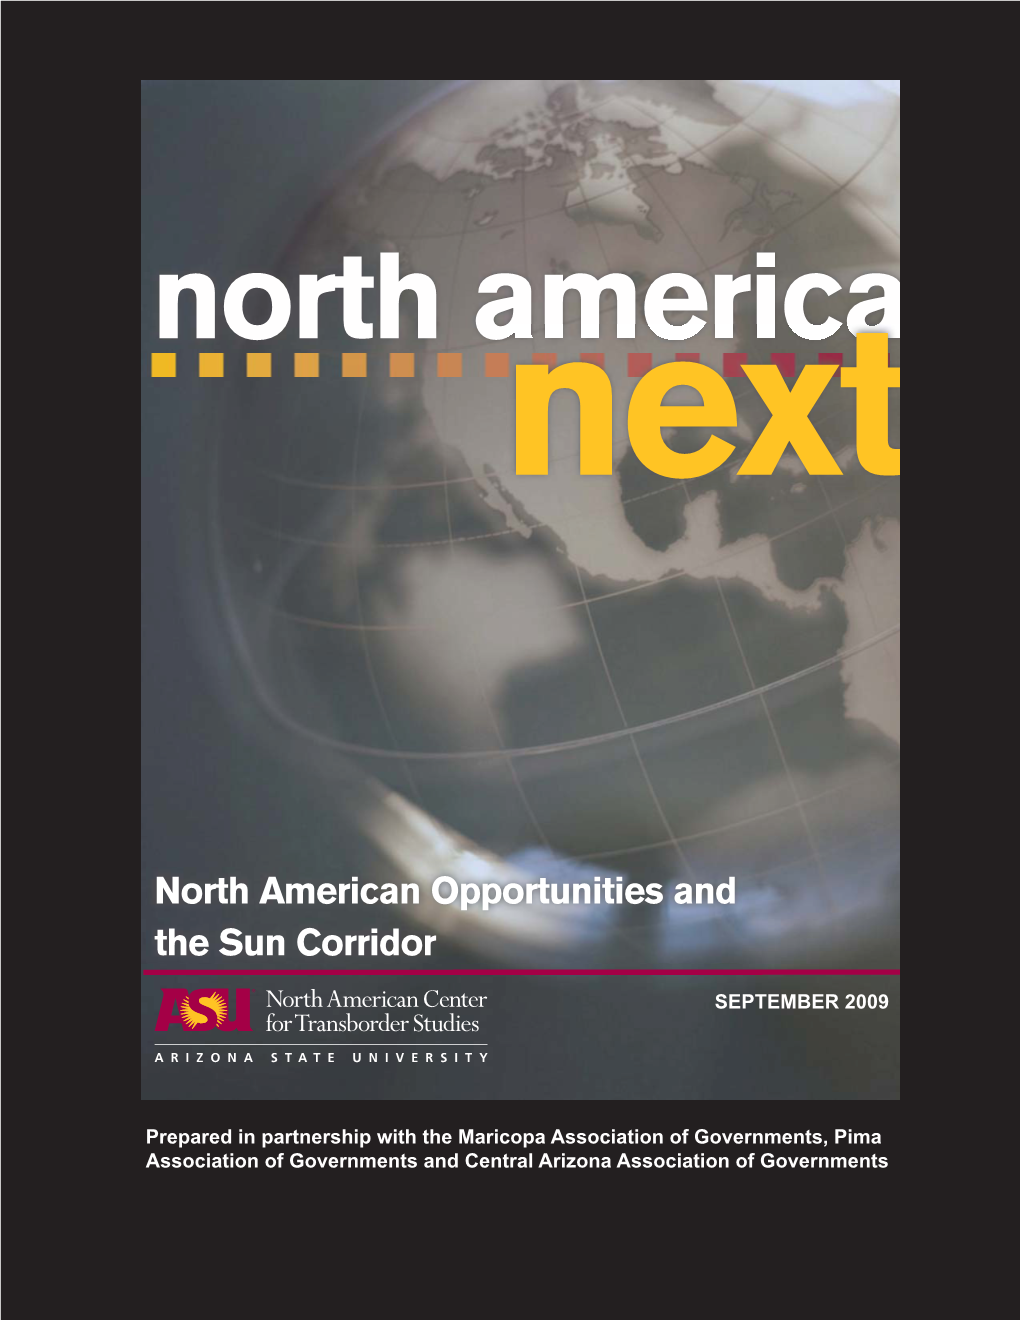 North American Opportunities and the Sun Corridor